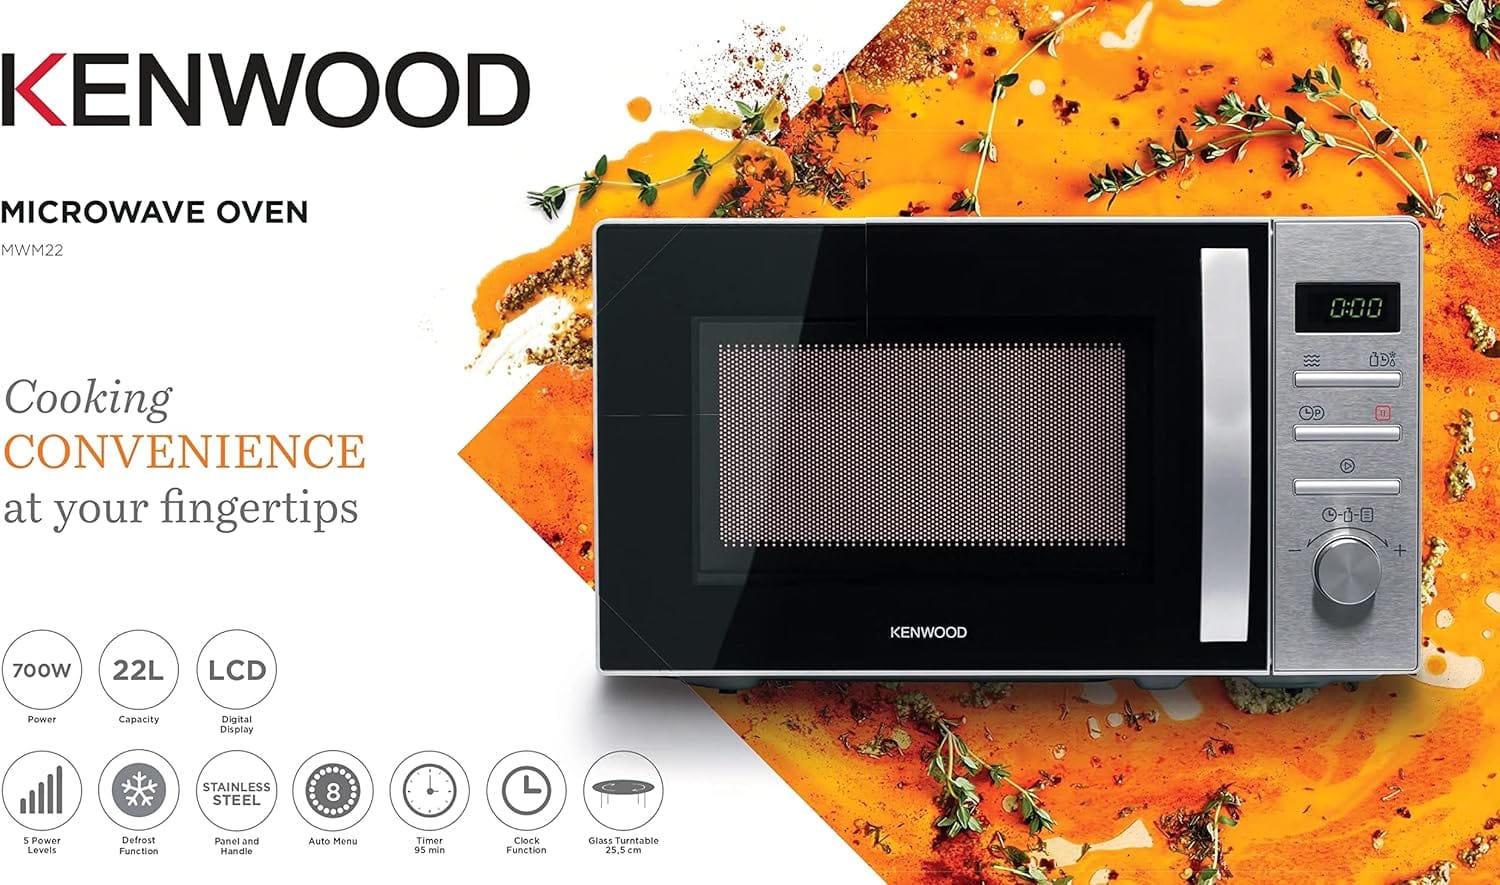 Kenwood 22L Microwave Oven 700W - MWM22 | Supply Master Accra, Ghana Kitchen Appliances Buy Tools hardware Building materials